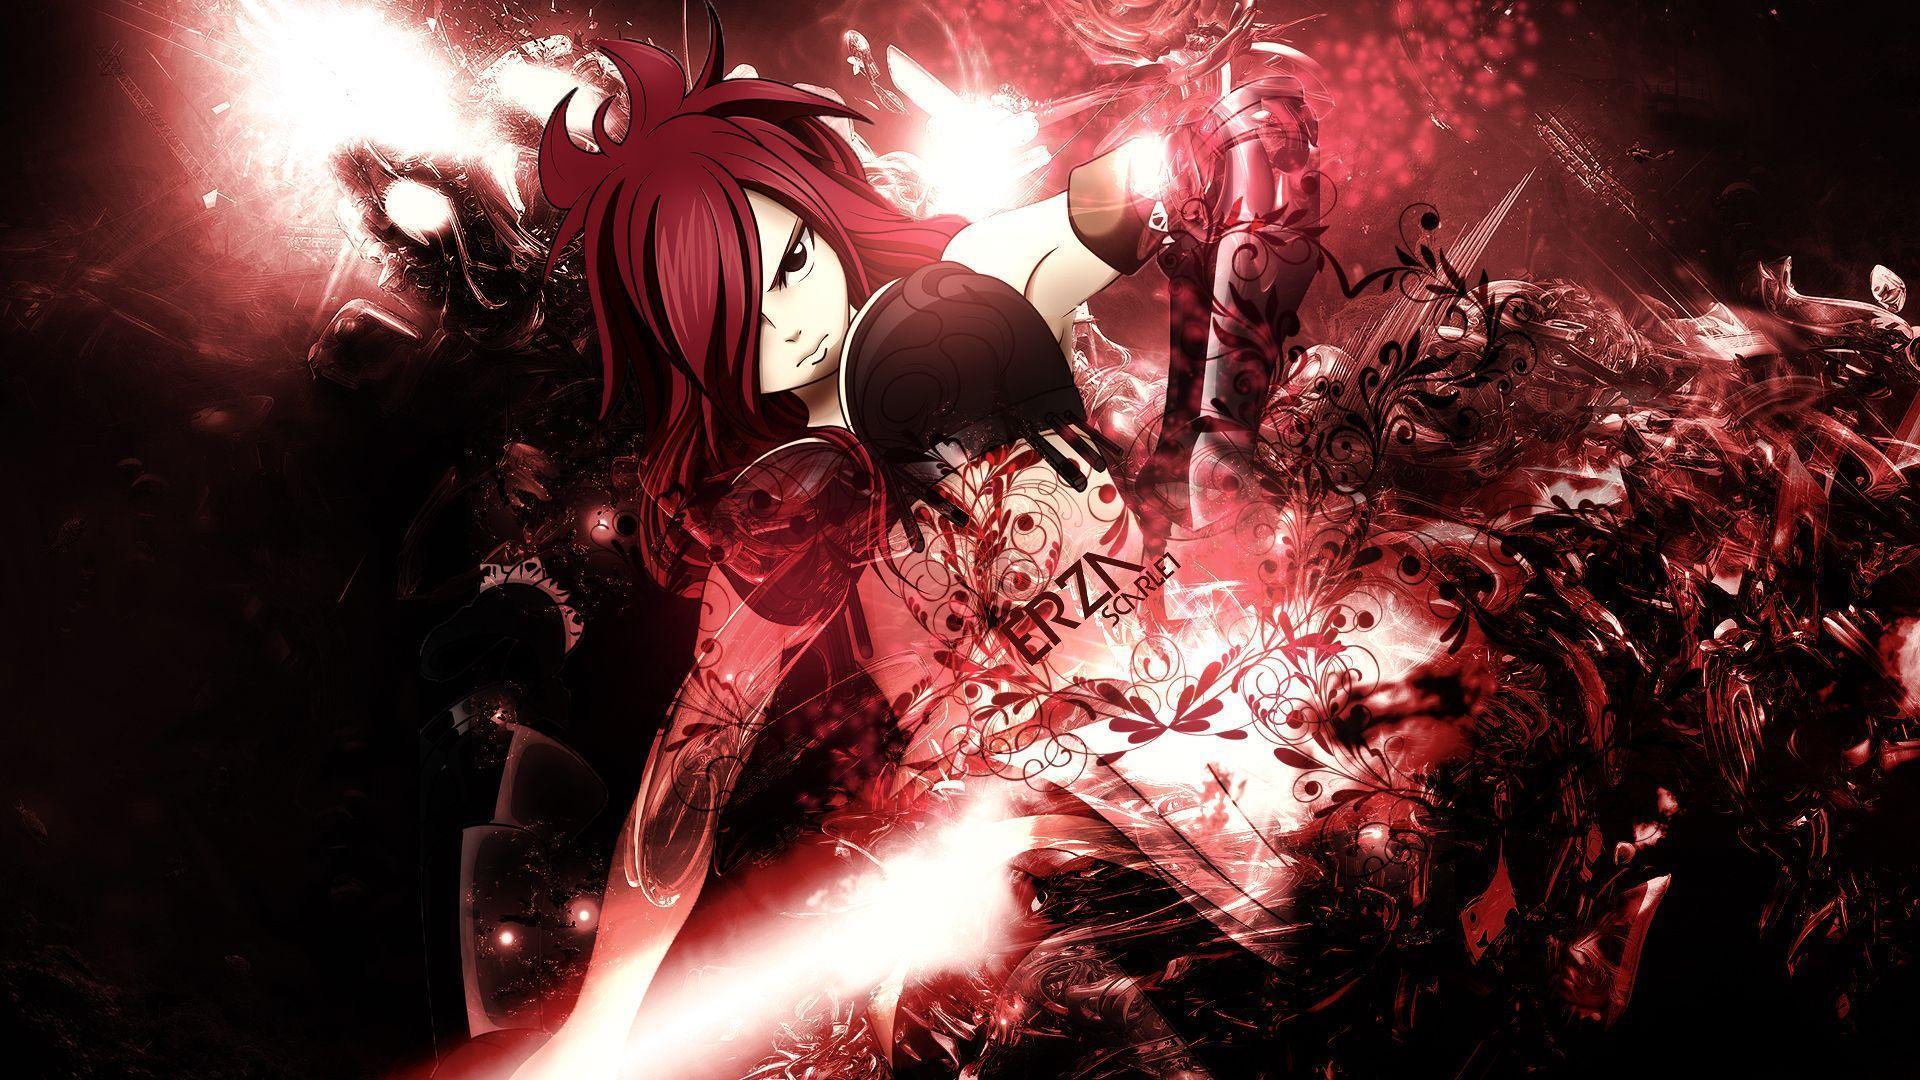 Fairy Tail Anime Wallpapers HD - Wallpaper Cave